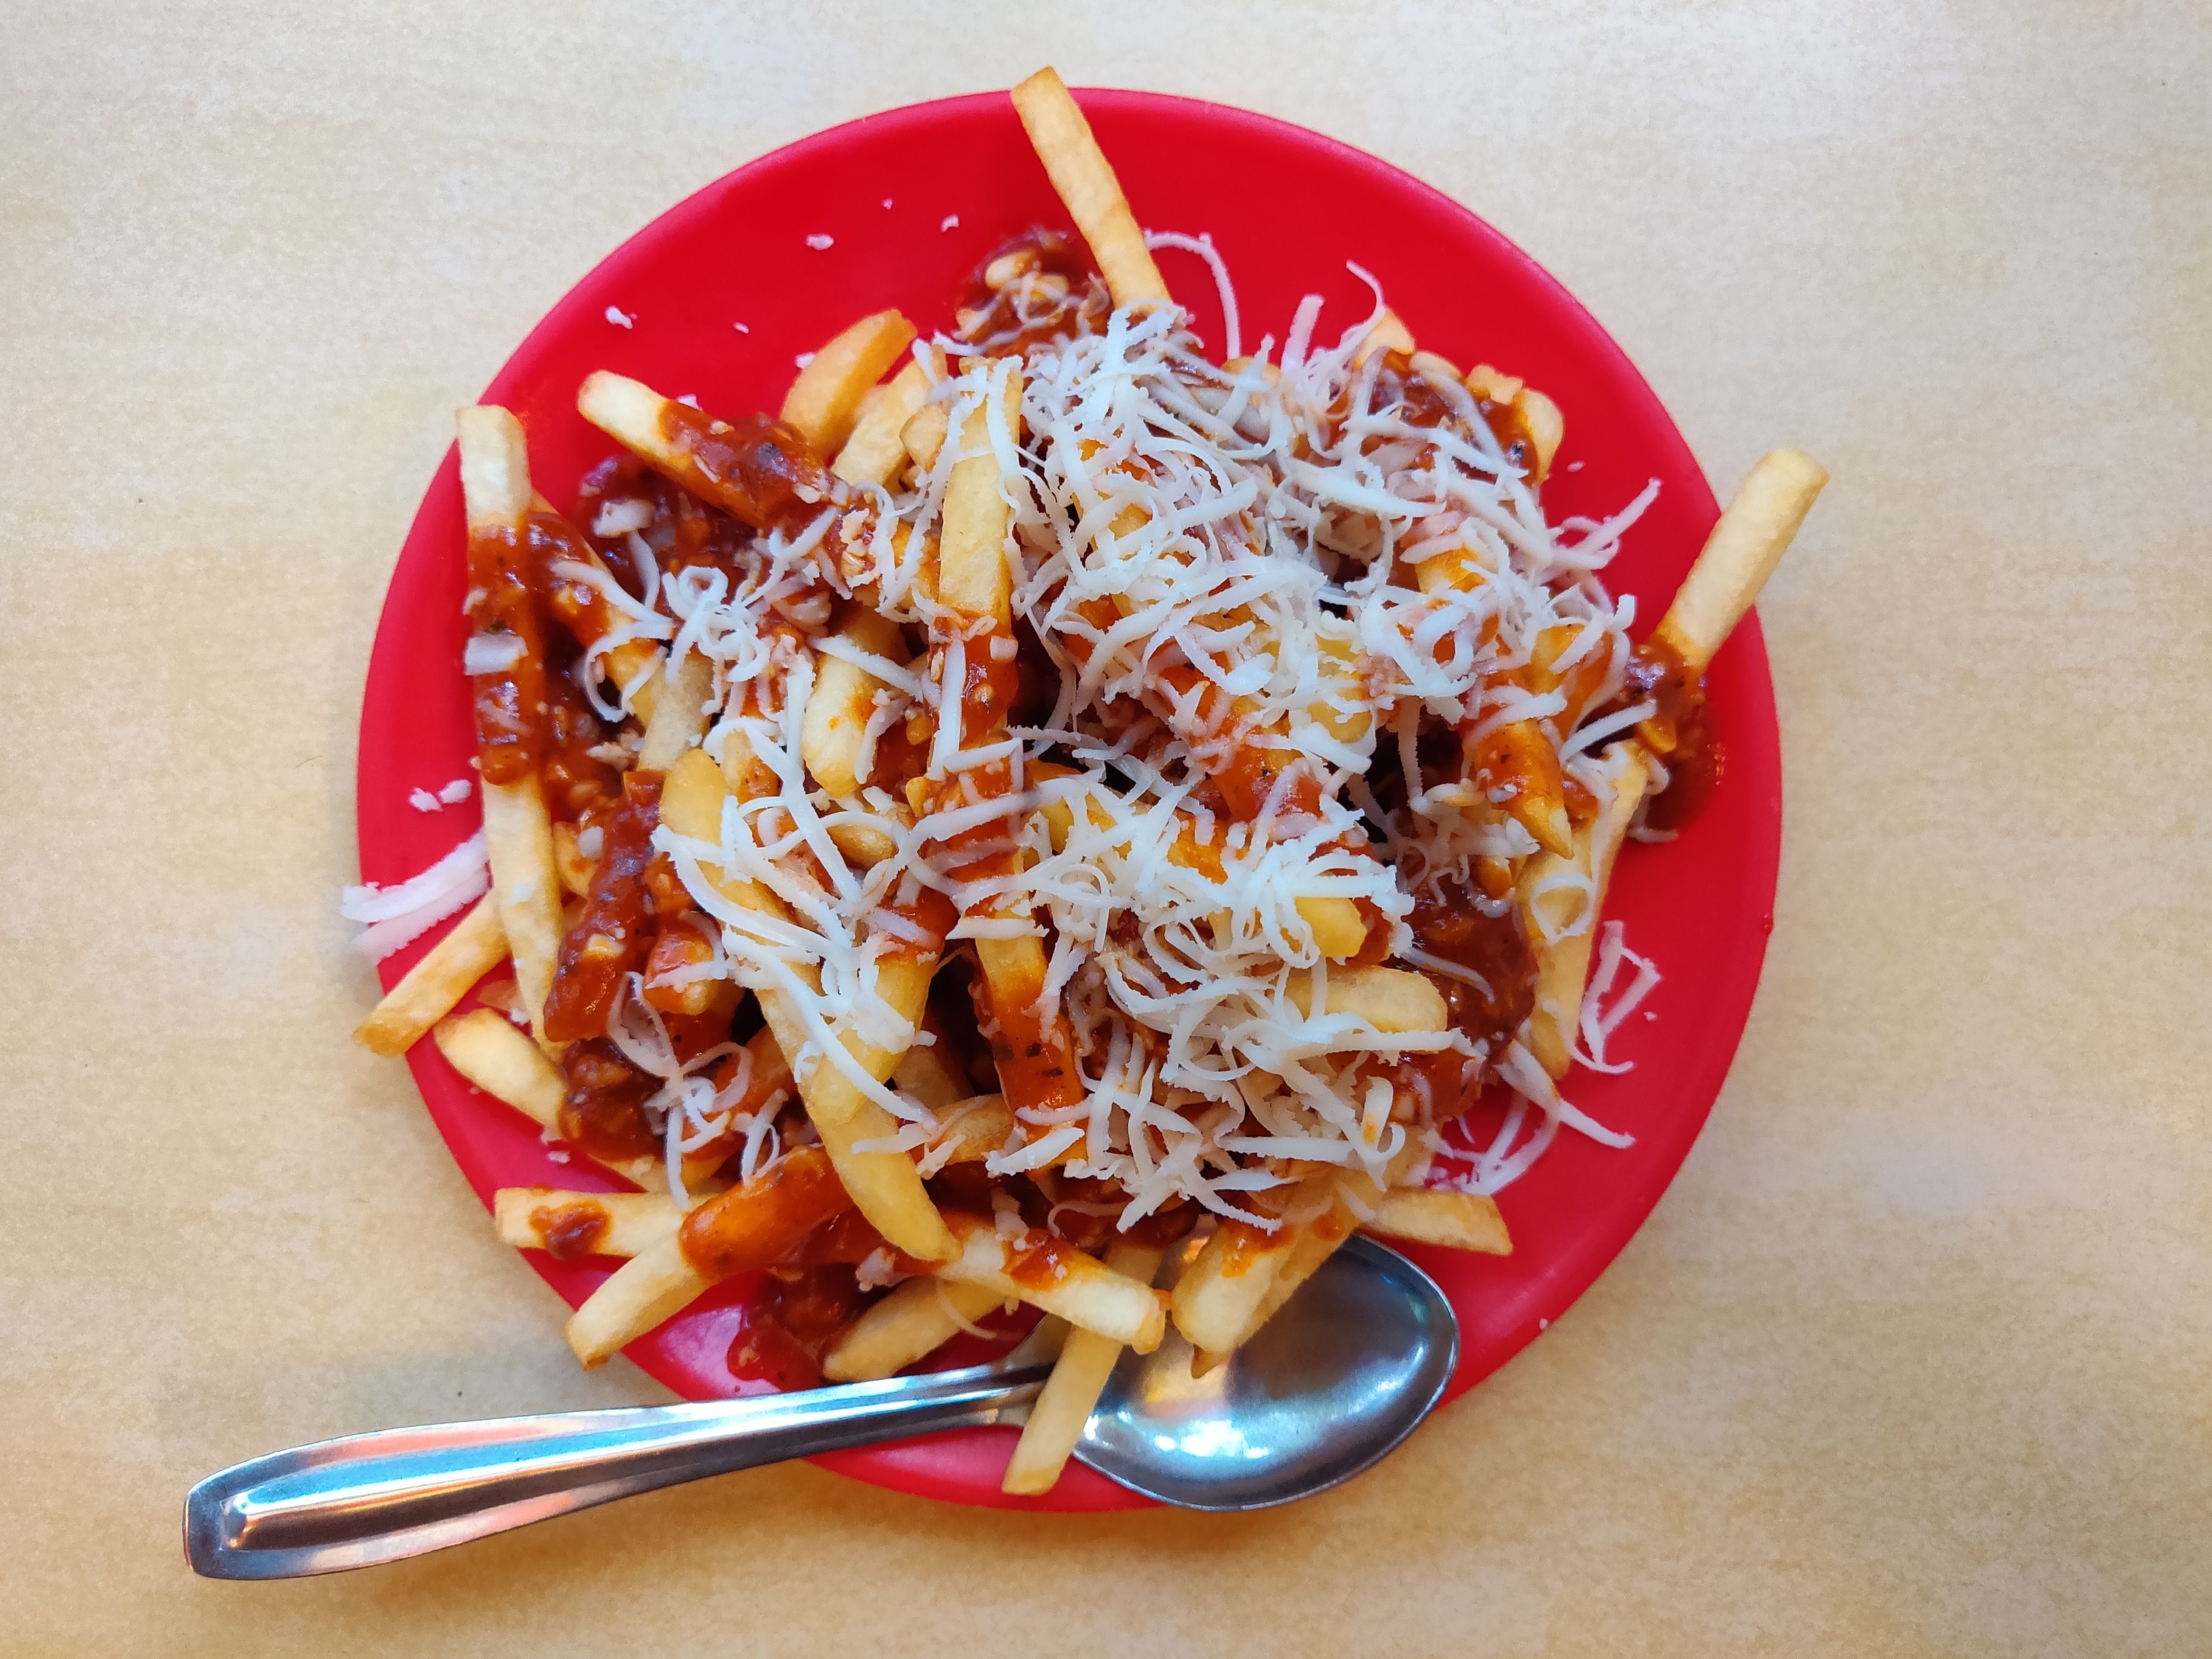 Fries topped with a red sauce and grated cheese